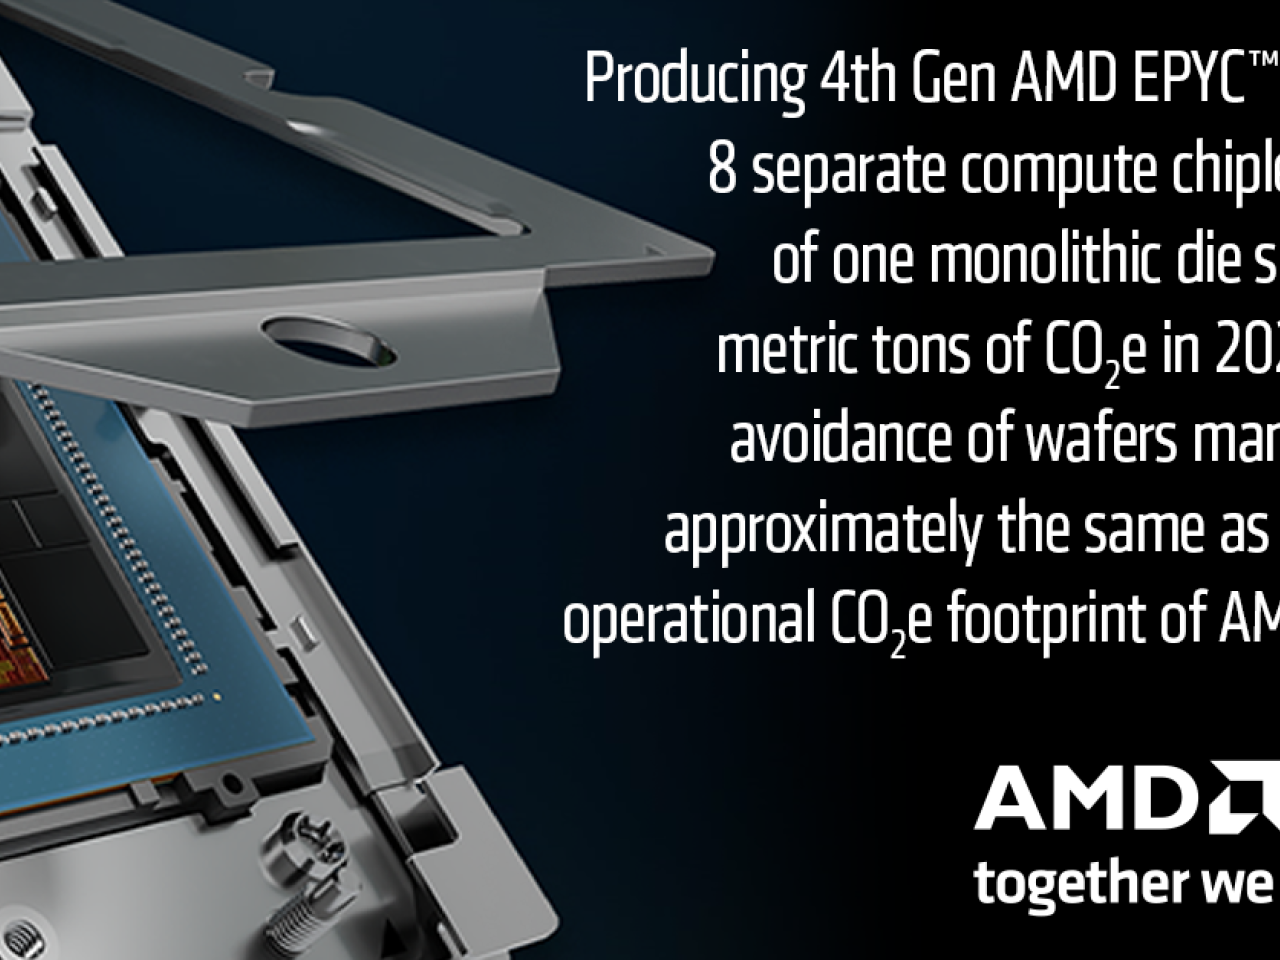 "Producing 4th Gen AMD EPYC™ CPUs with 8 separate compute chiplets instead of one monolithic die saved ~50K metric tons of CO2e in 2023 through avoidance of wafers manufactured, approximately the same as the annual operational CO2e footprint of AMD in 2022."